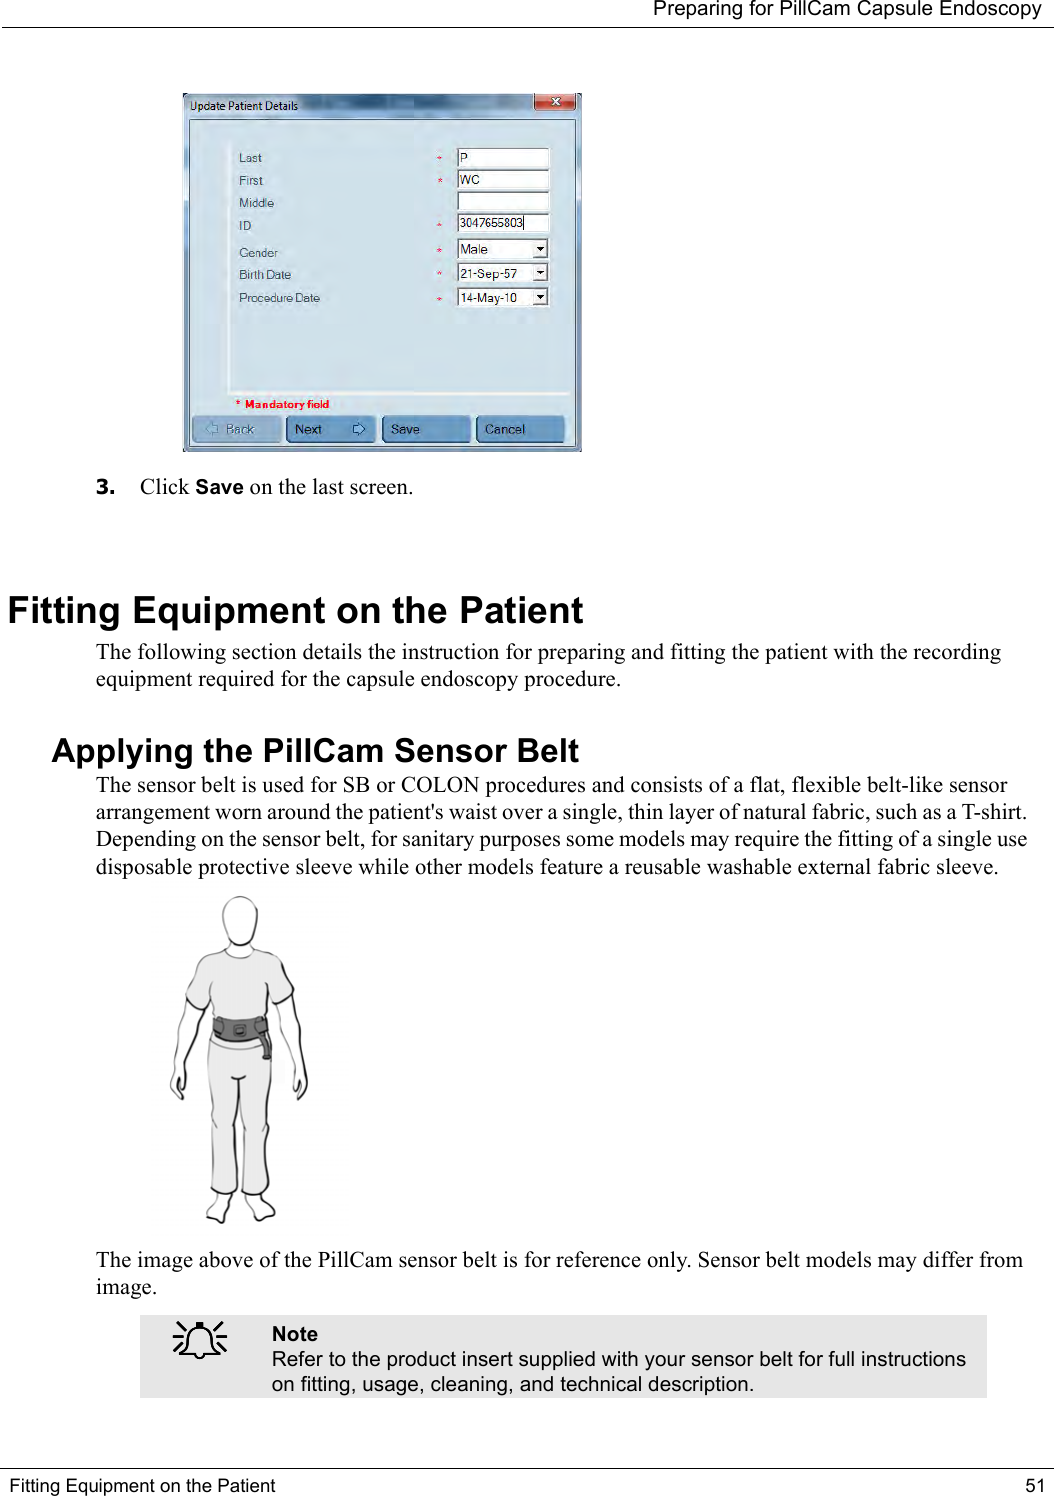 Preparing for PillCam Capsule EndoscopyFitting Equipment on the Patient 51 3. Click Save on the last screen.Fitting Equipment on the PatientThe following section details the instruction for preparing and fitting the patient with the recording equipment required for the capsule endoscopy procedure. Applying the PillCam Sensor BeltThe sensor belt is used for SB or COLON procedures and consists of a flat, flexible belt-like sensor arrangement worn around the patient&apos;s waist over a single, thin layer of natural fabric, such as a T-shirt. Depending on the sensor belt, for sanitary purposes some models may require the fitting of a single use disposable protective sleeve while other models feature a reusable washable external fabric sleeve. The image above of the PillCam sensor belt is for reference only. Sensor belt models may differ from image.֠֠֠֠NoteRefer to the product insert supplied with your sensor belt for full instructions on fitting, usage, cleaning, and technical description. 